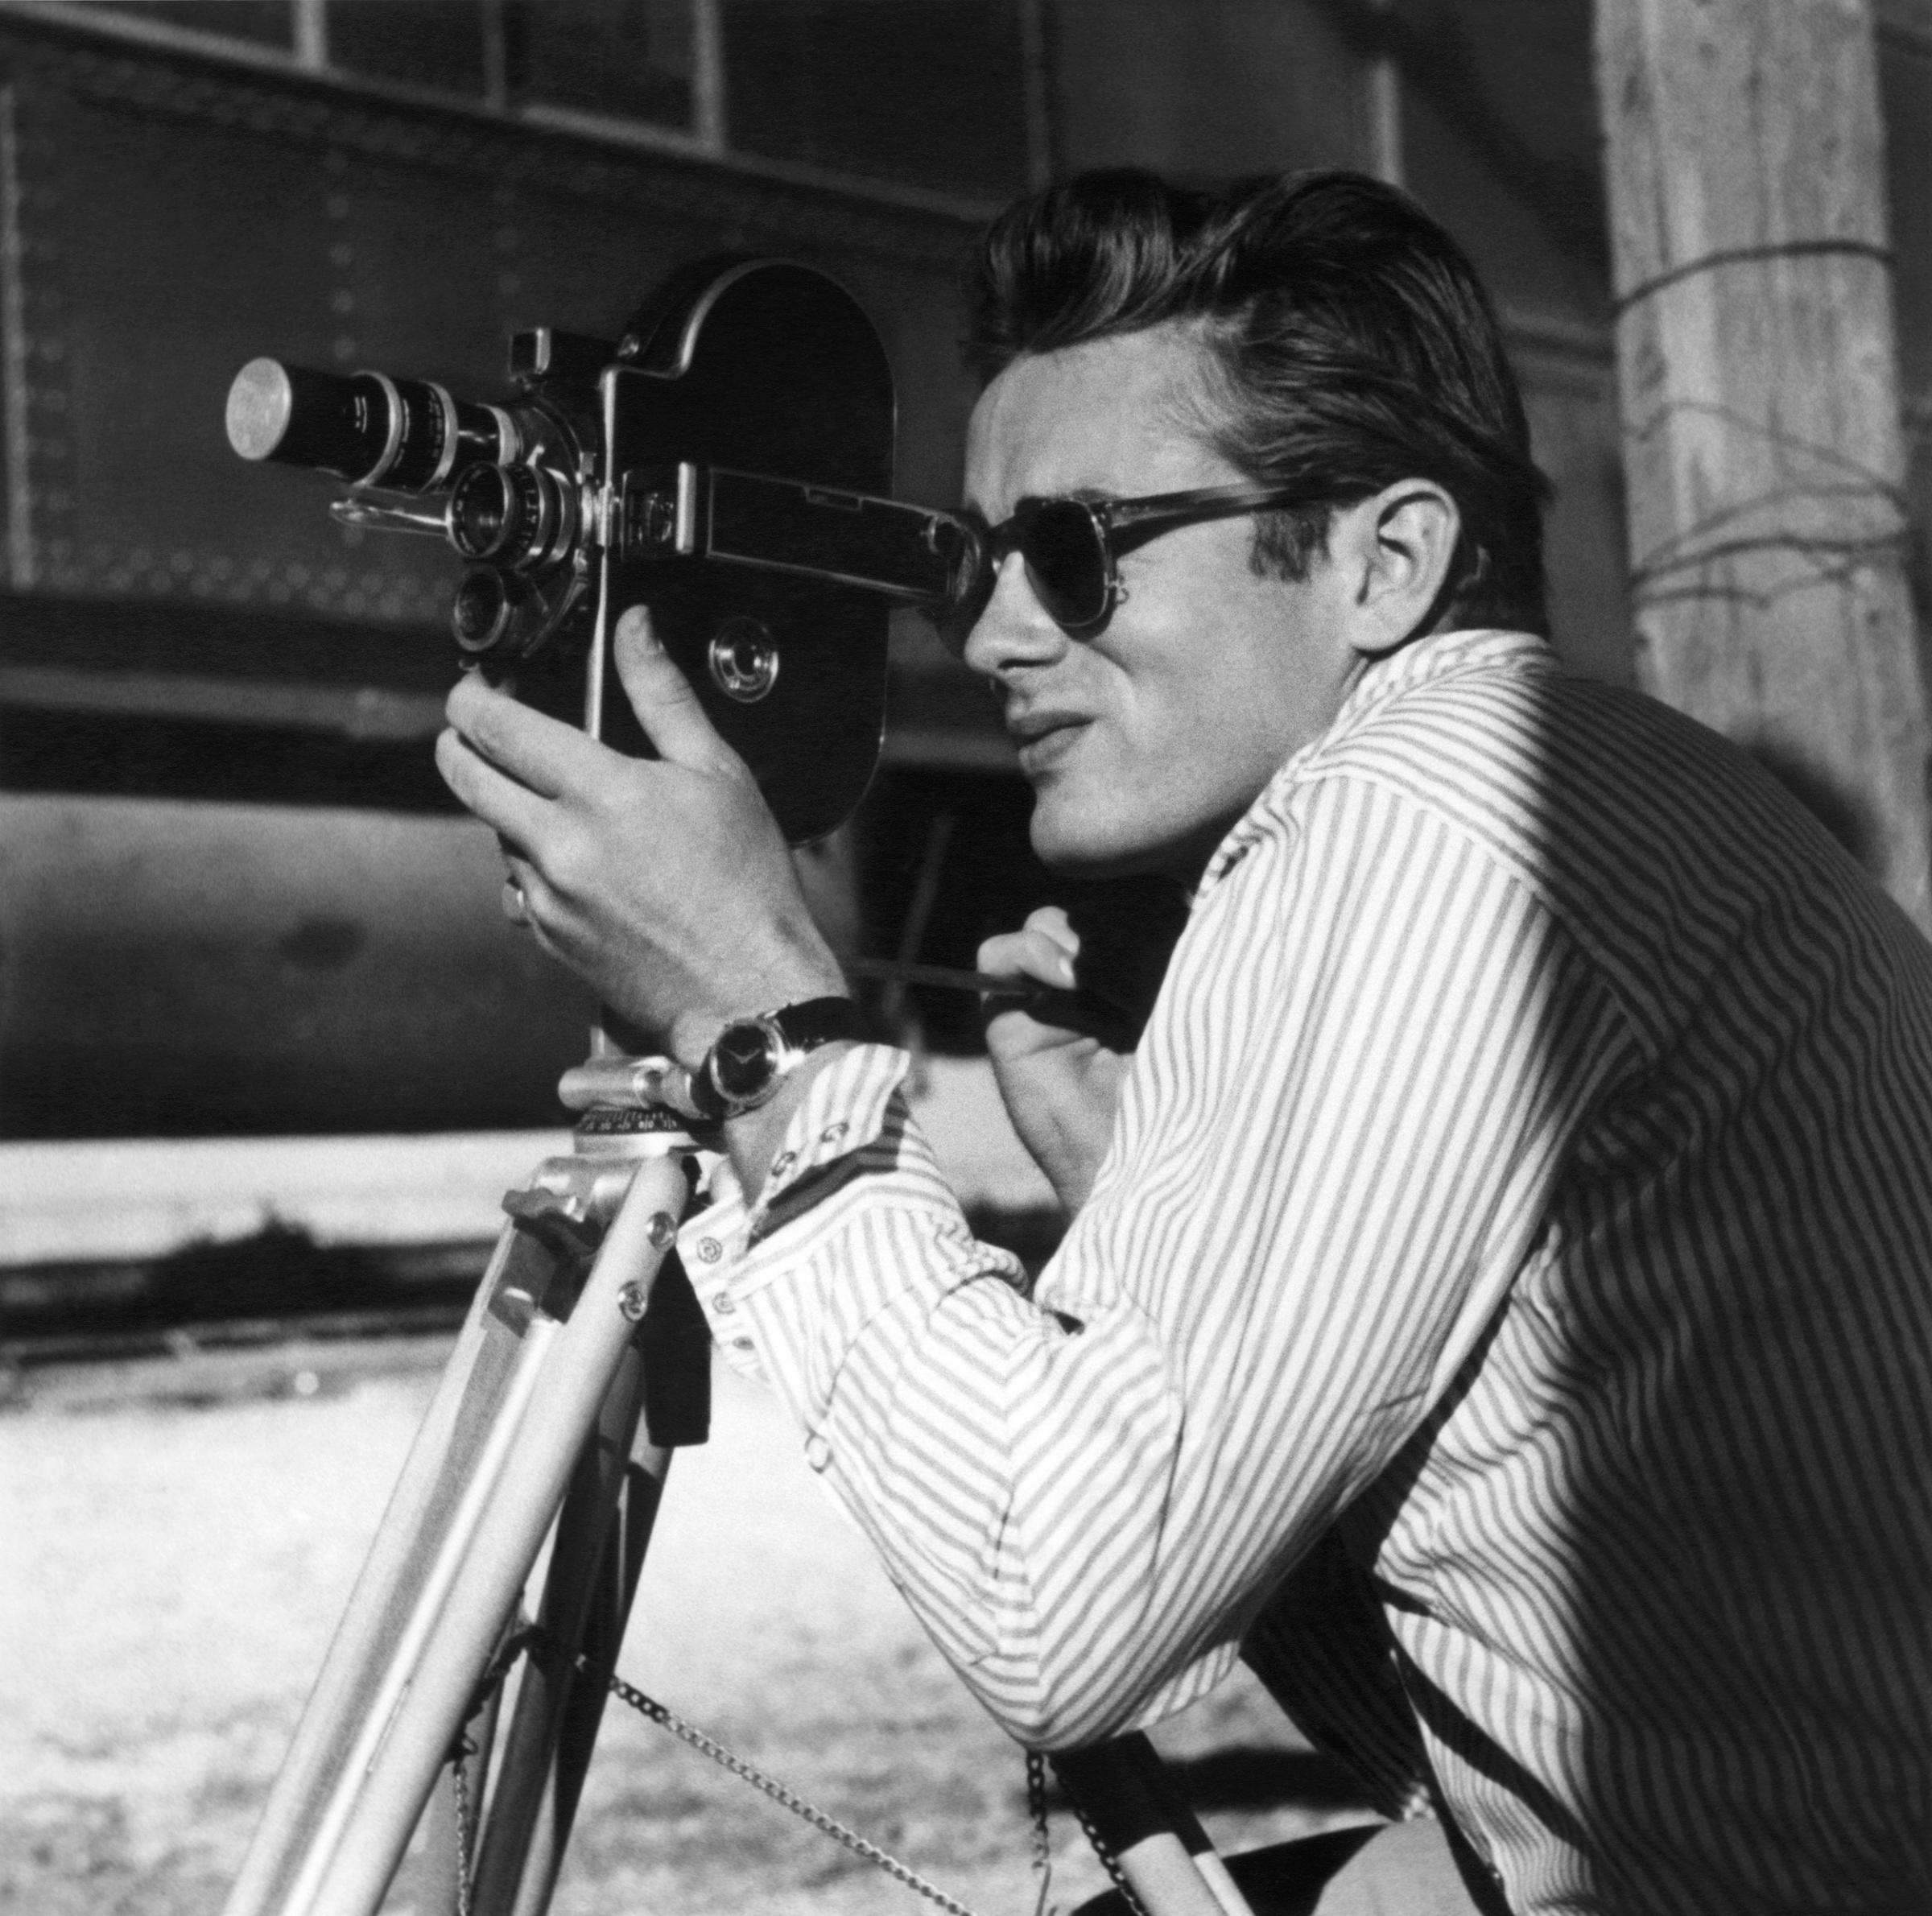 James Dean on the set of Giant, 1955.